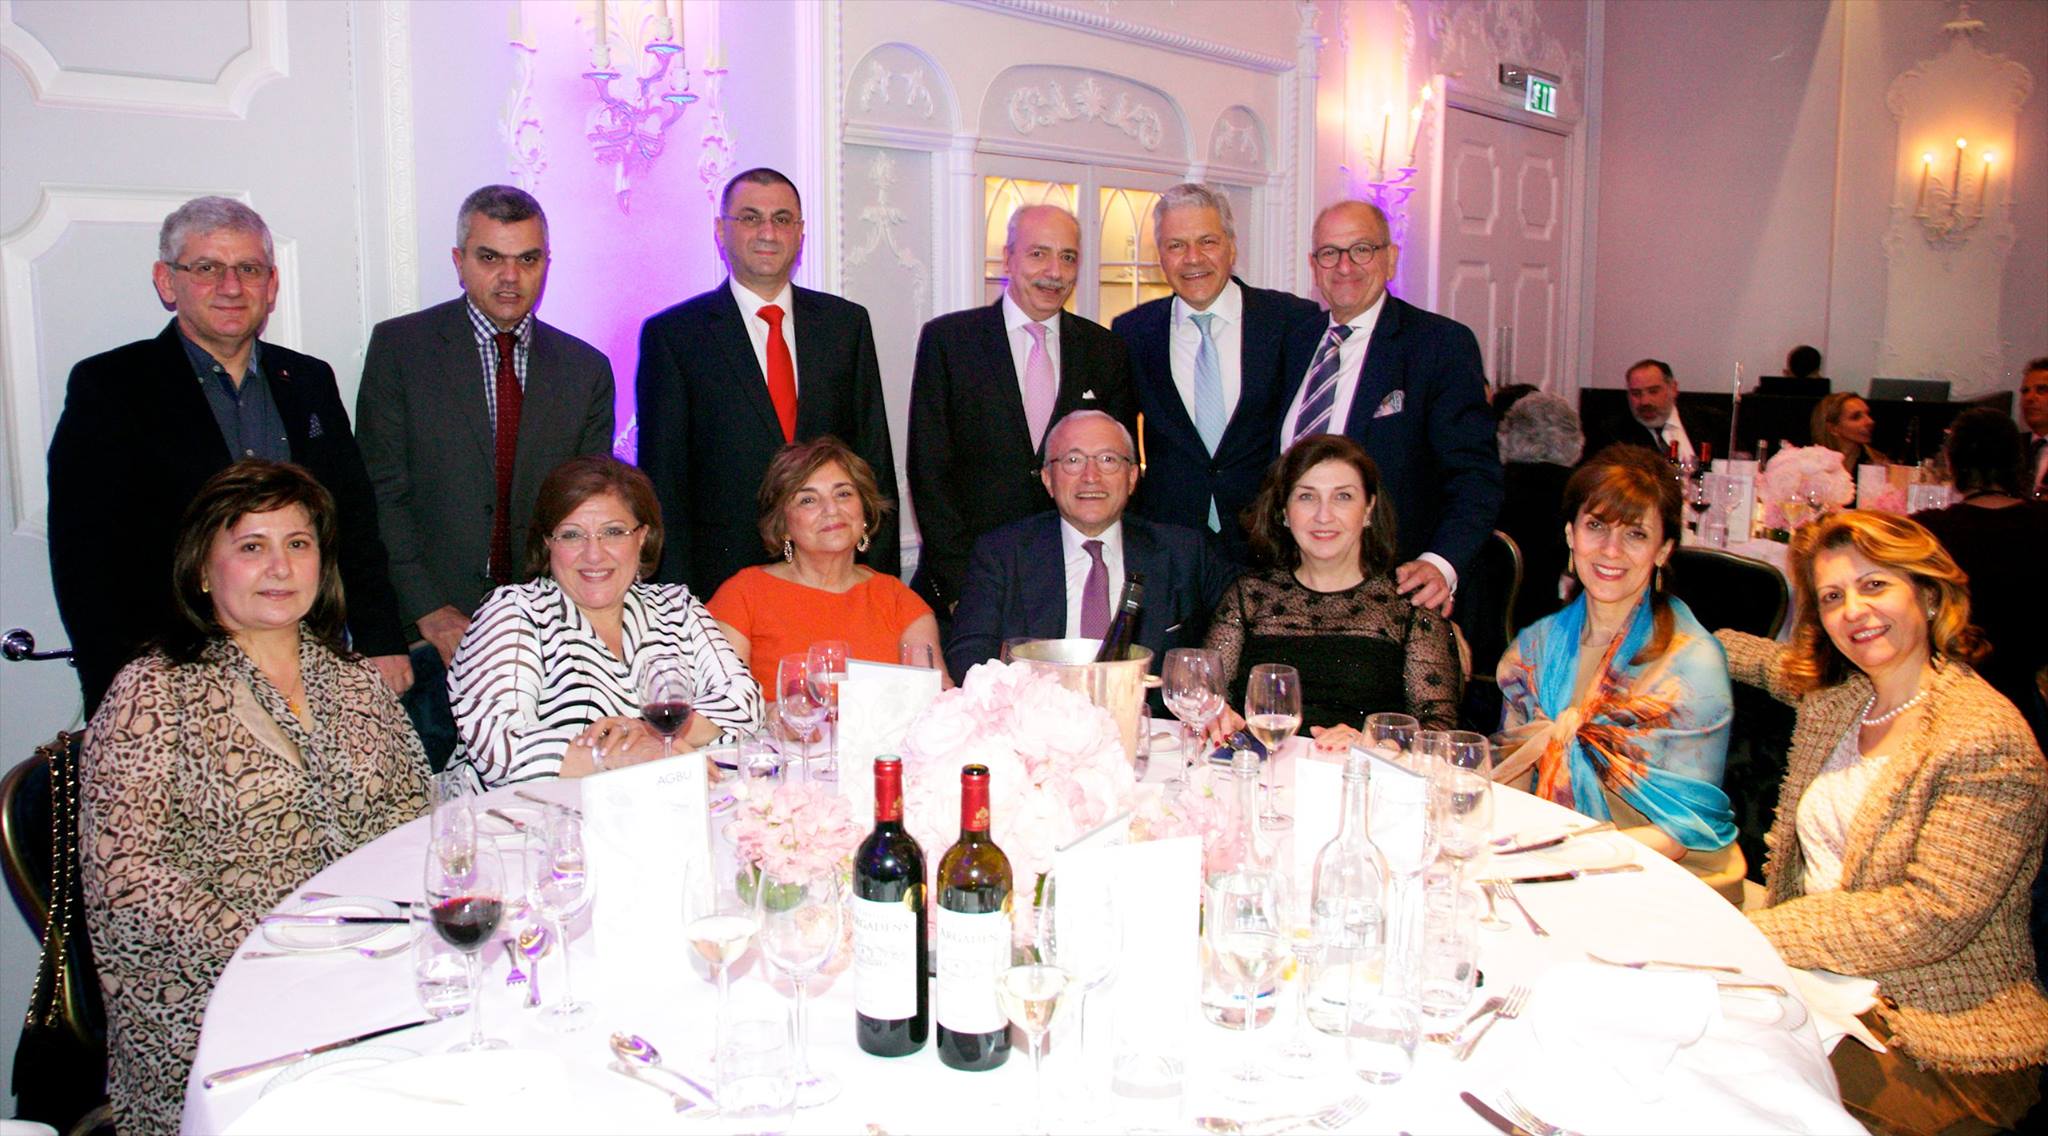 The AGBU Central Board Emphasizes its Youth in a Series of Strategic Meetings in London